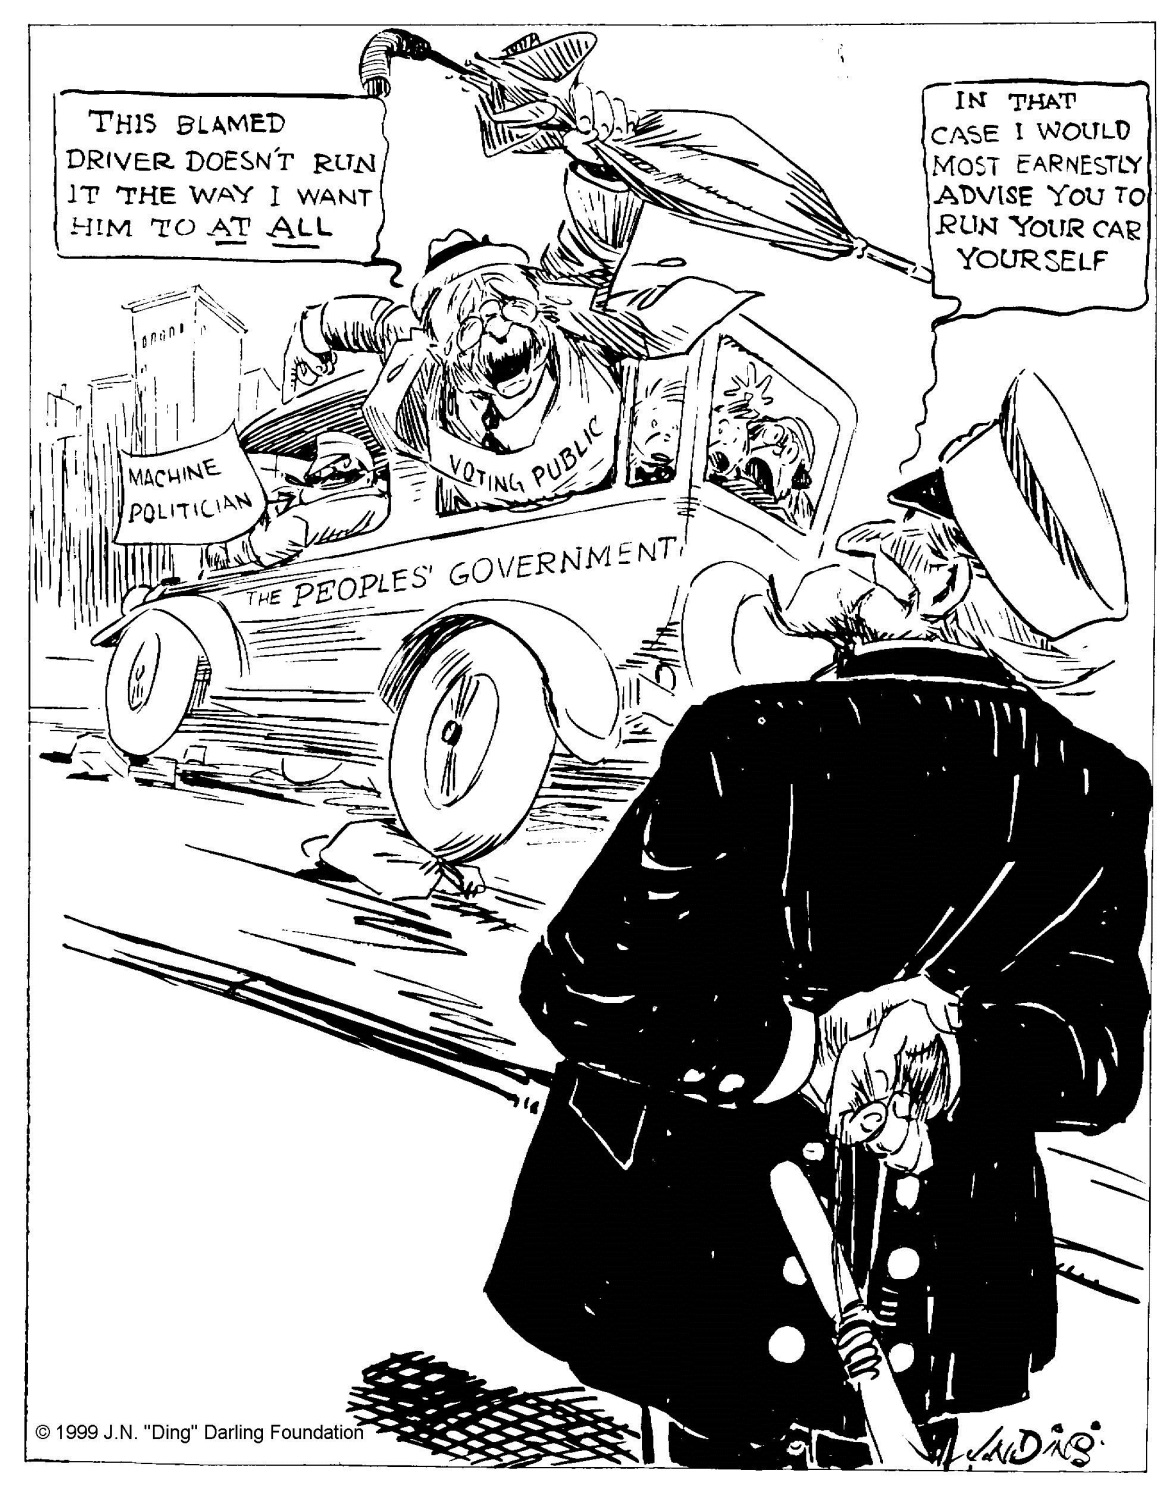 "They make 'em now so anyone of average intelligence can drive if he prefers," by "Ding" Darling, The Des Moines Register, December 3, 1922. Courtesy of the Ding Darling Foundation. 